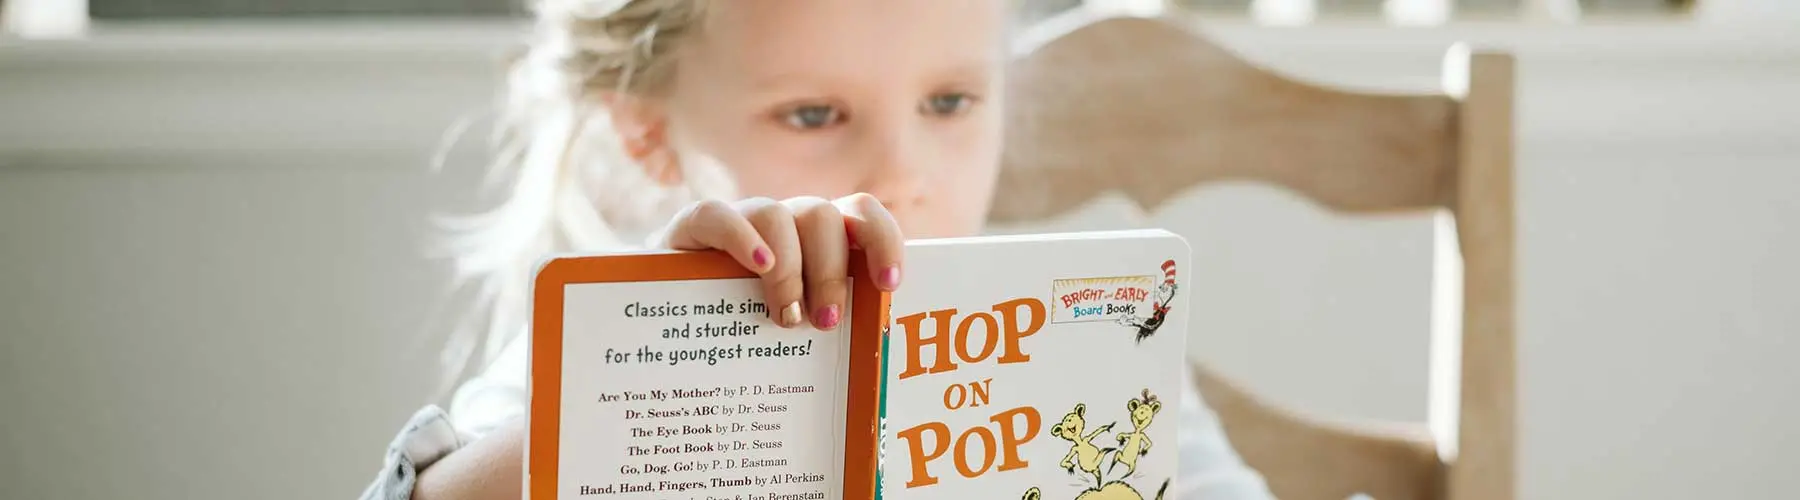 Young girl is reading Dr. Seuss' "Hop on Pop"